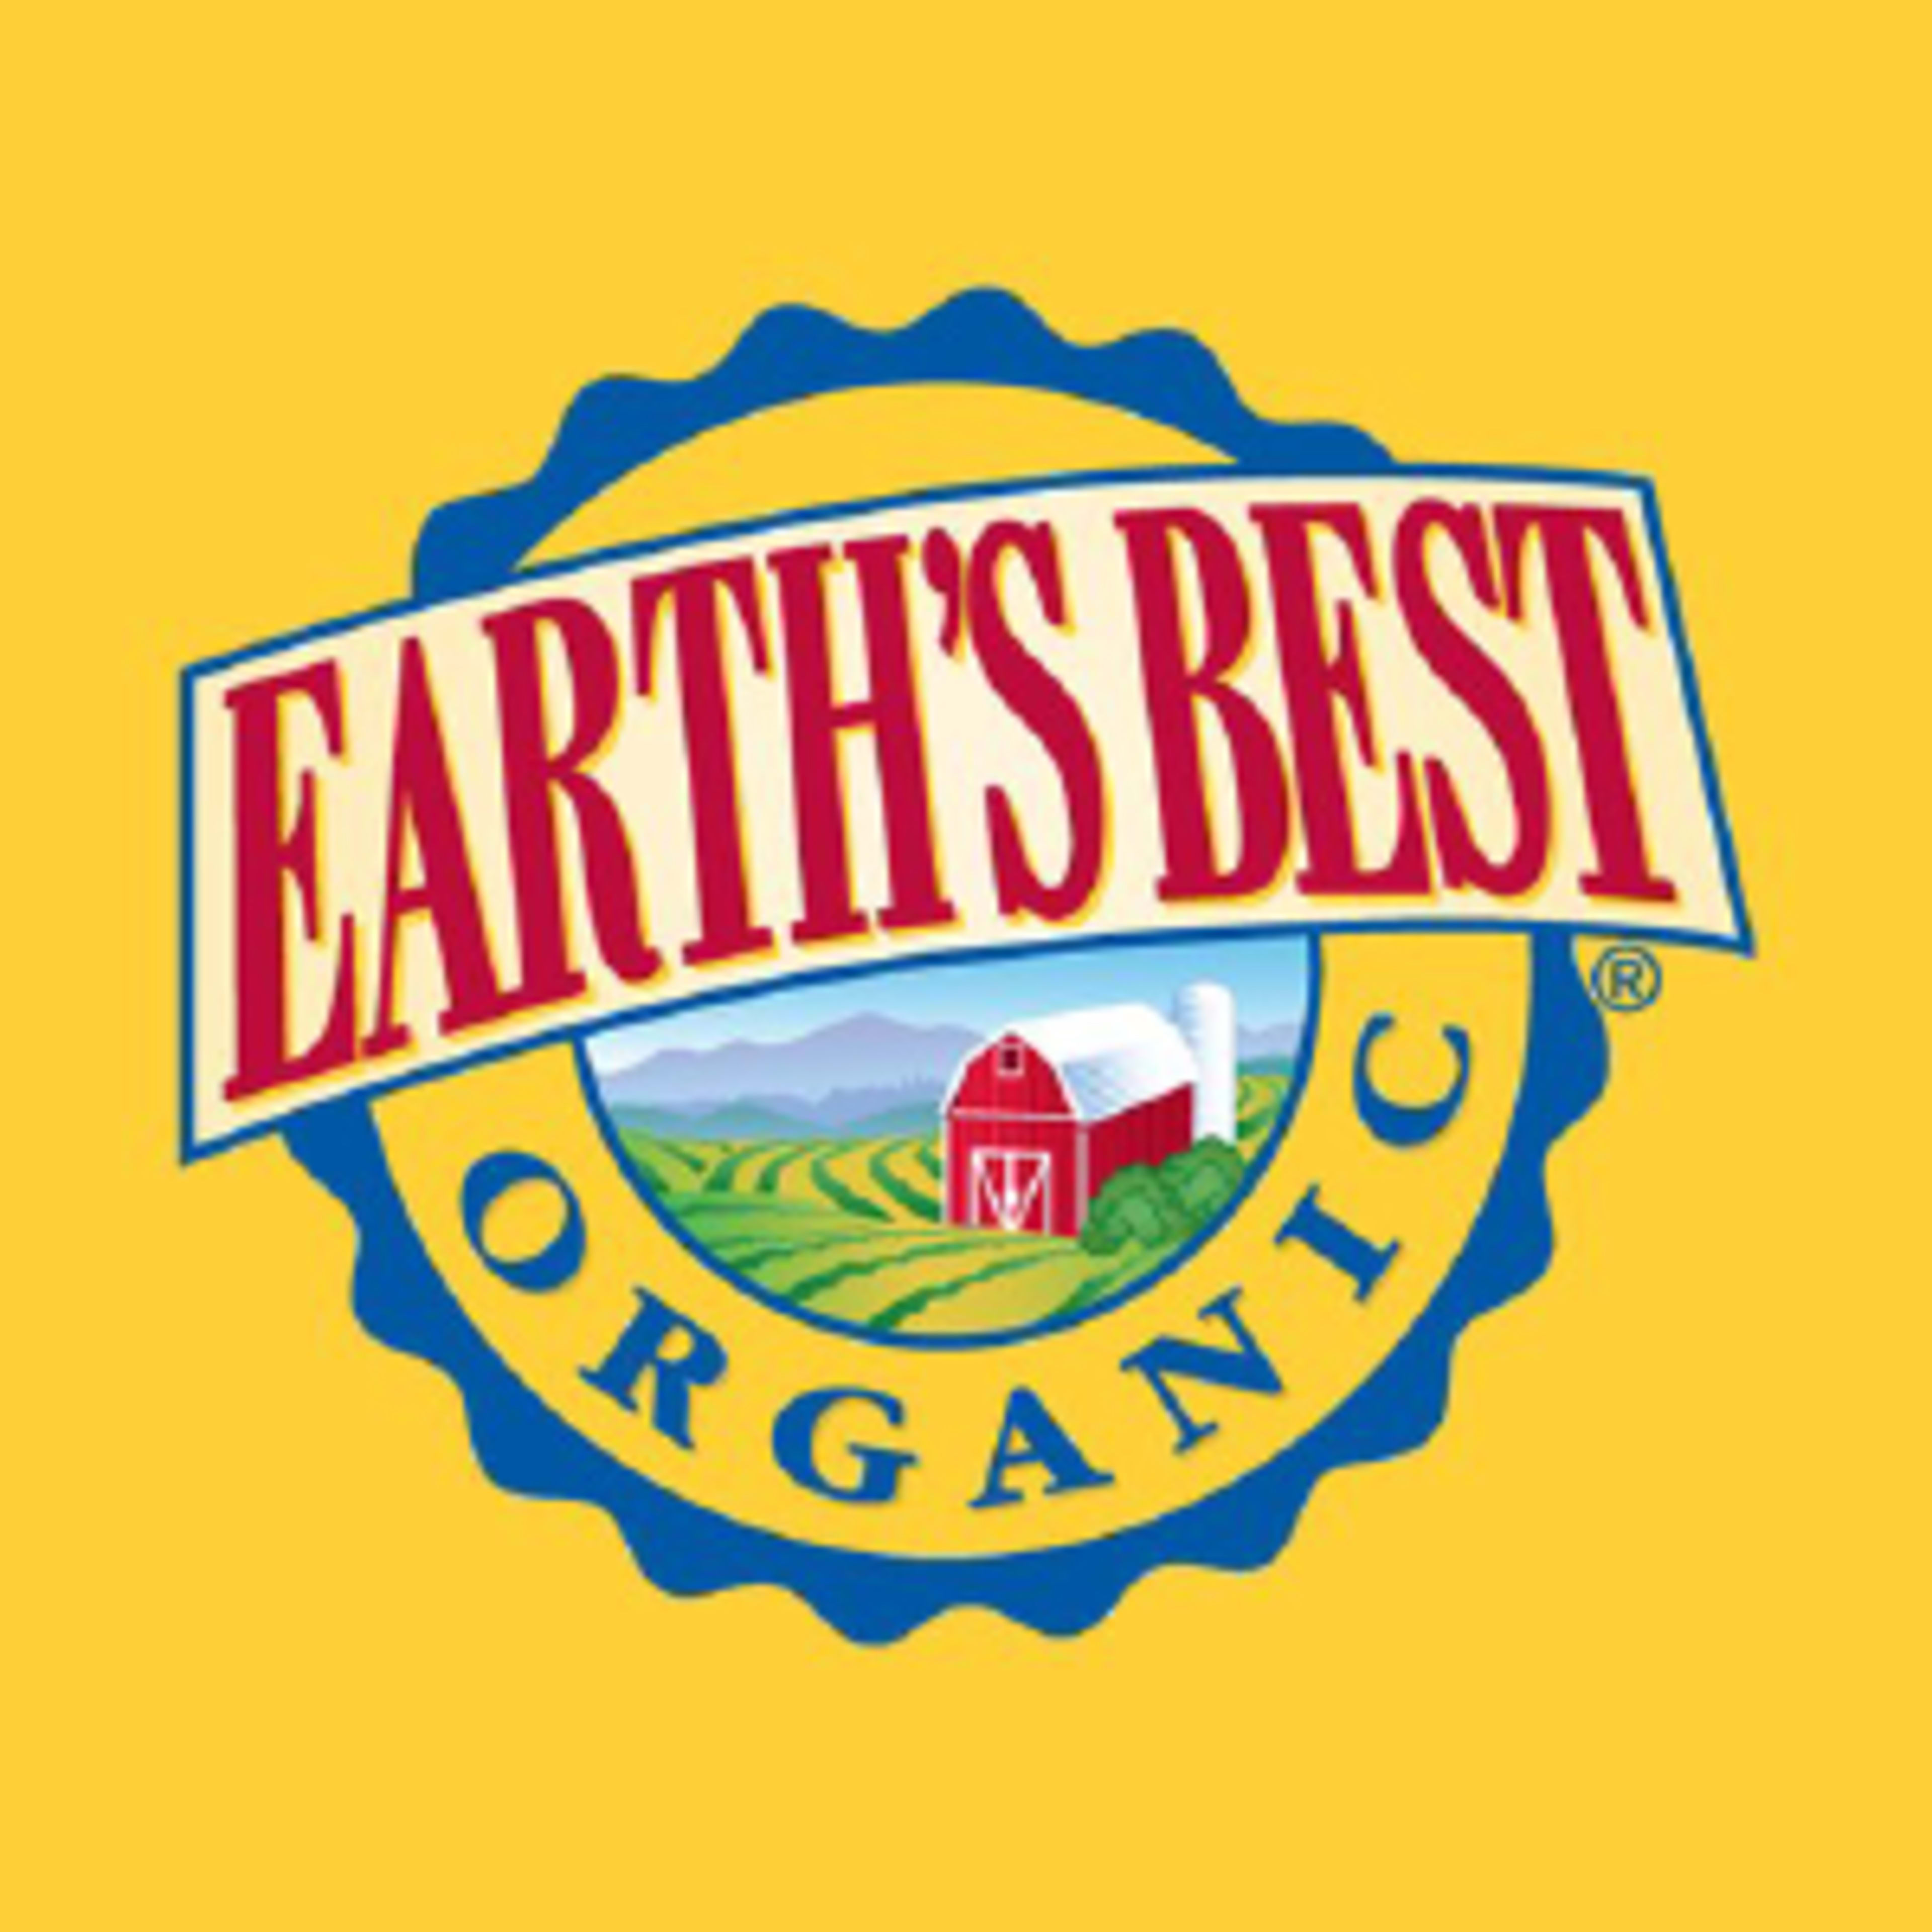 Earth's Best Baby FoodCode